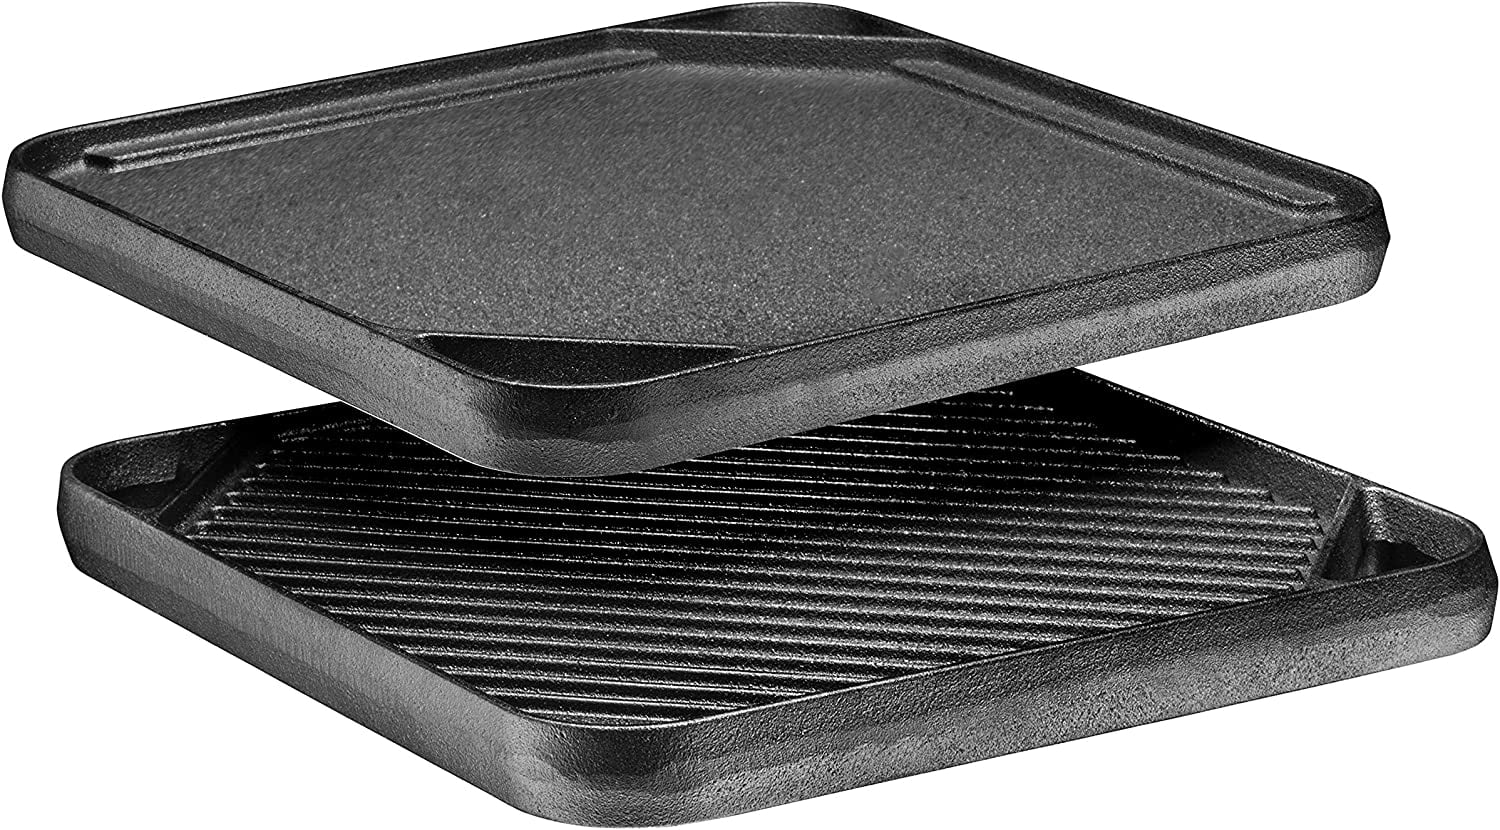 Cast Iron Griddle, Plus Cast Iron Grill Press & Pan Scrapers - Reversible  Grill/Griddle for Stove top, Gas, Preseasoned & Non-Stick, measure 17 x 9